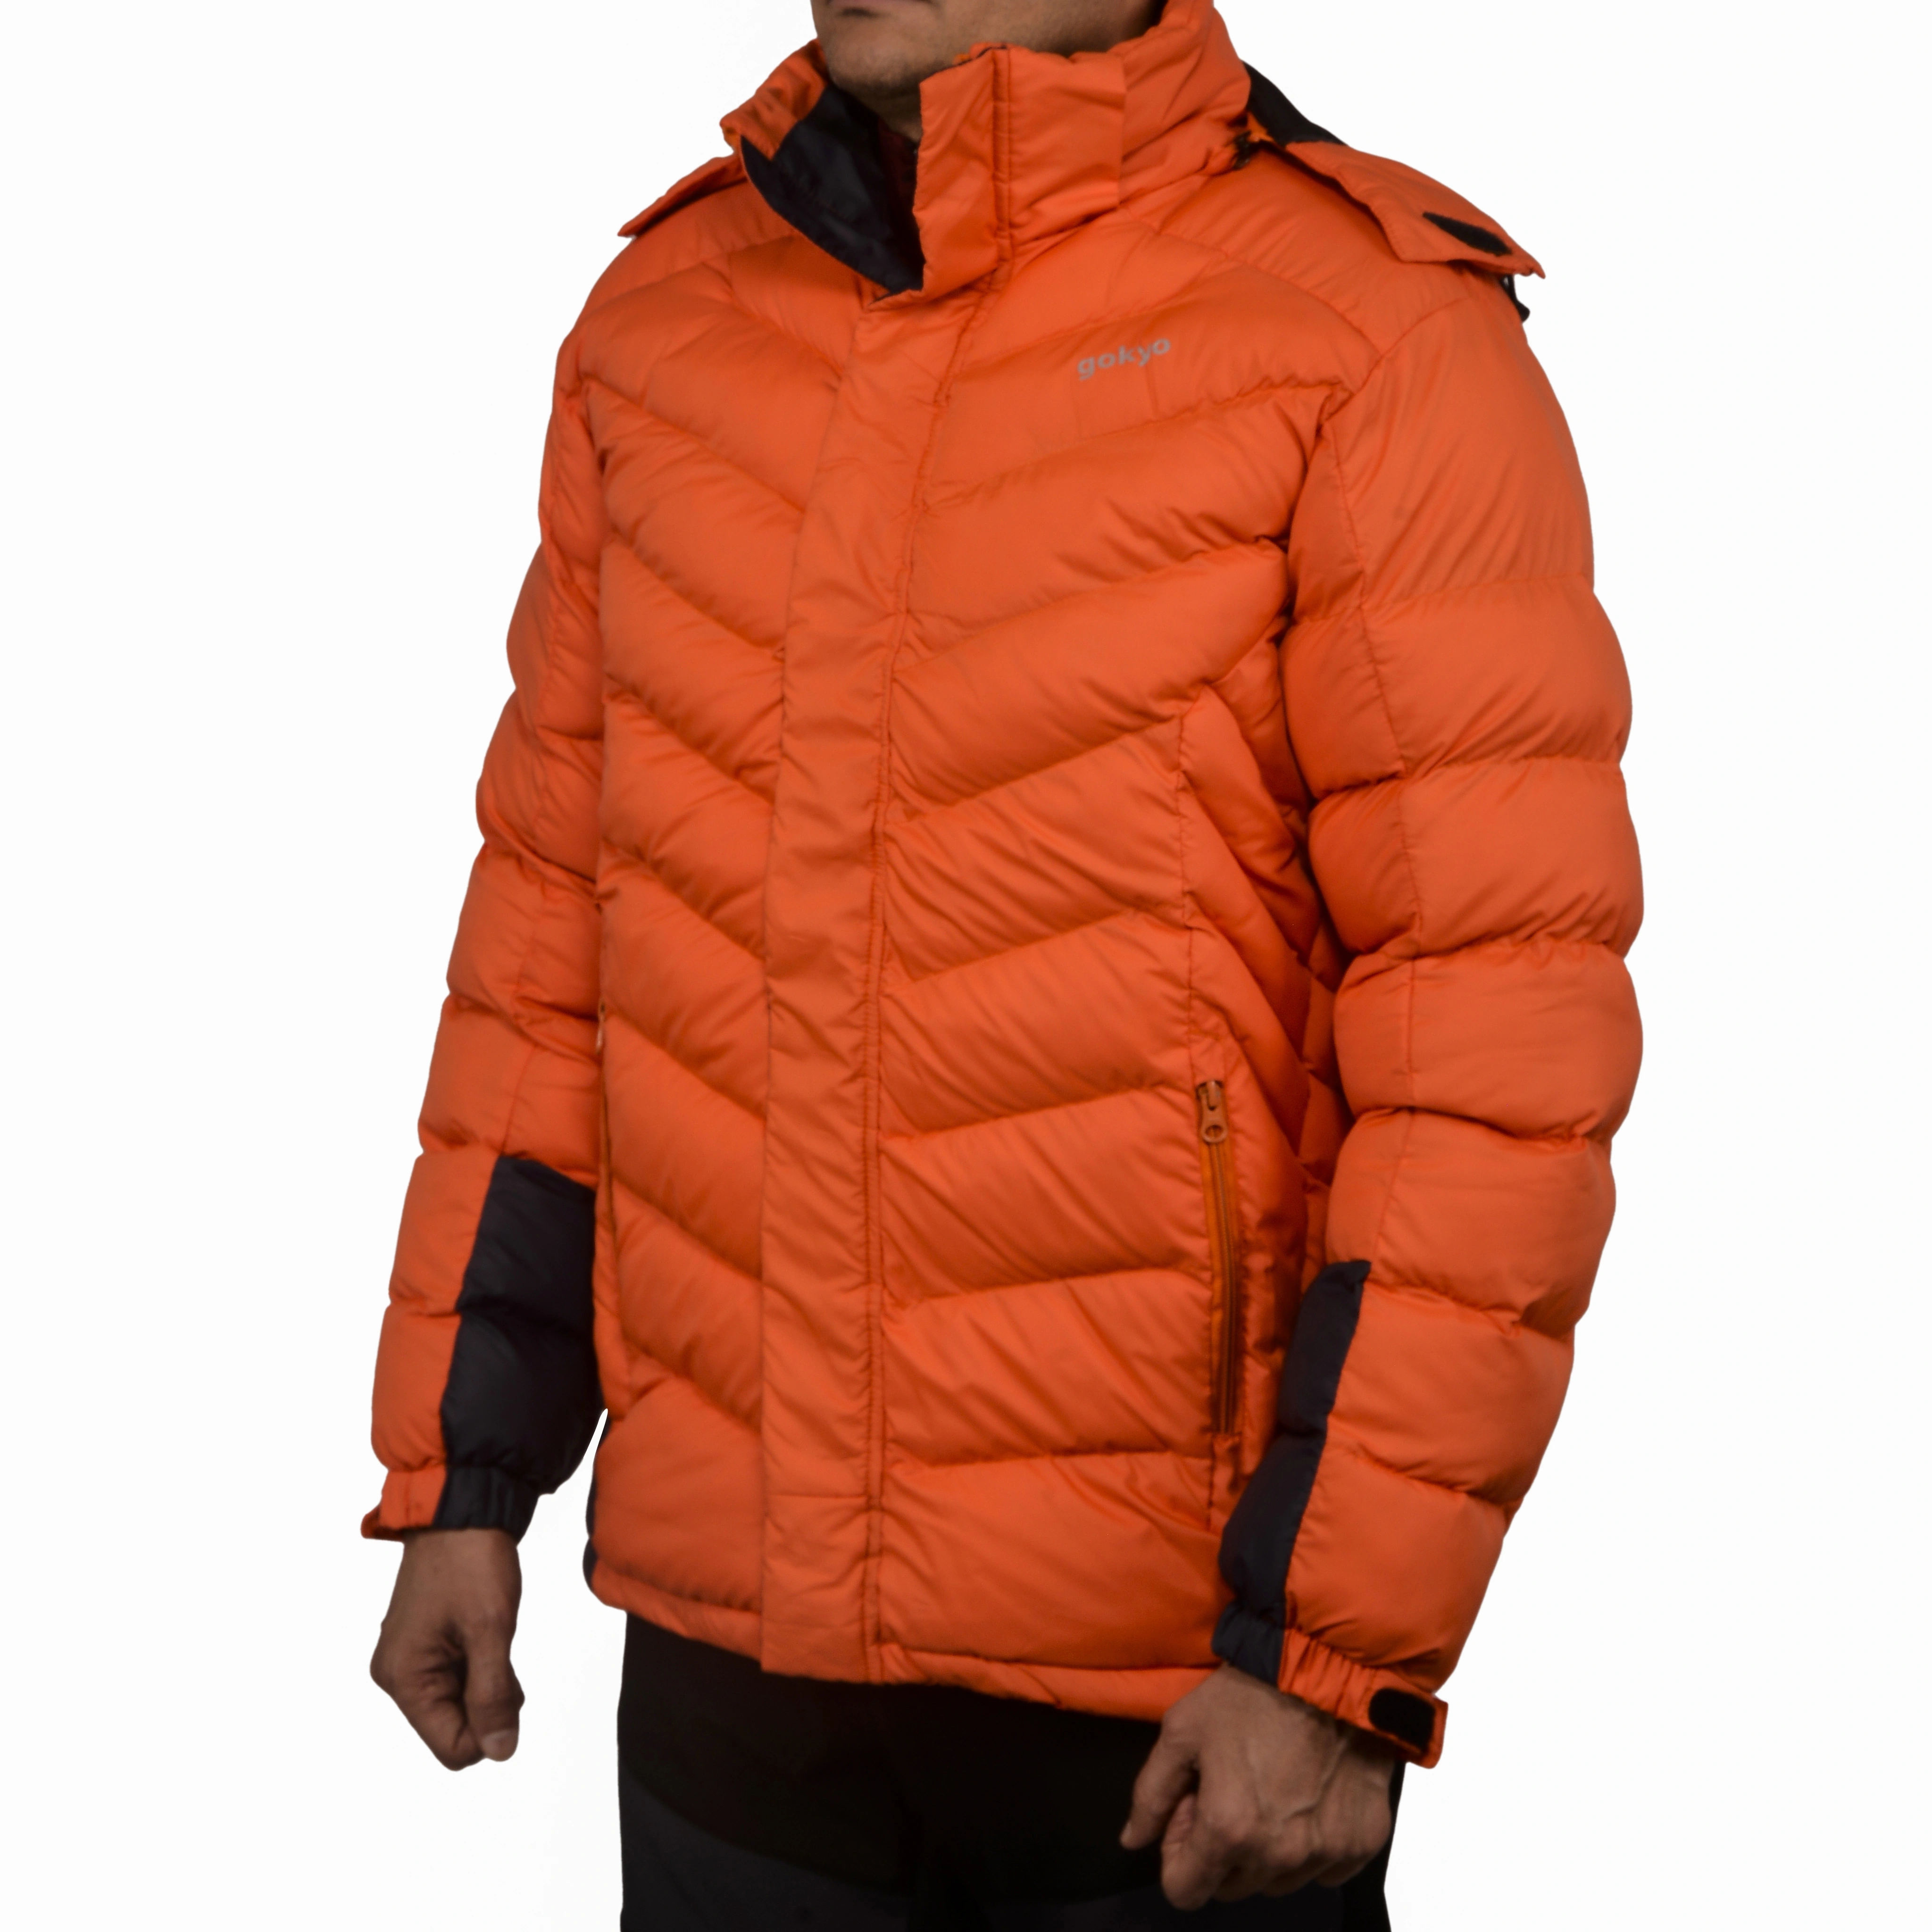 K2 Survivor Down Jacket for Men: Stylized Functionality for Extreme Cold Weather Expeditions (Up to -20°C)-M-Orange-2